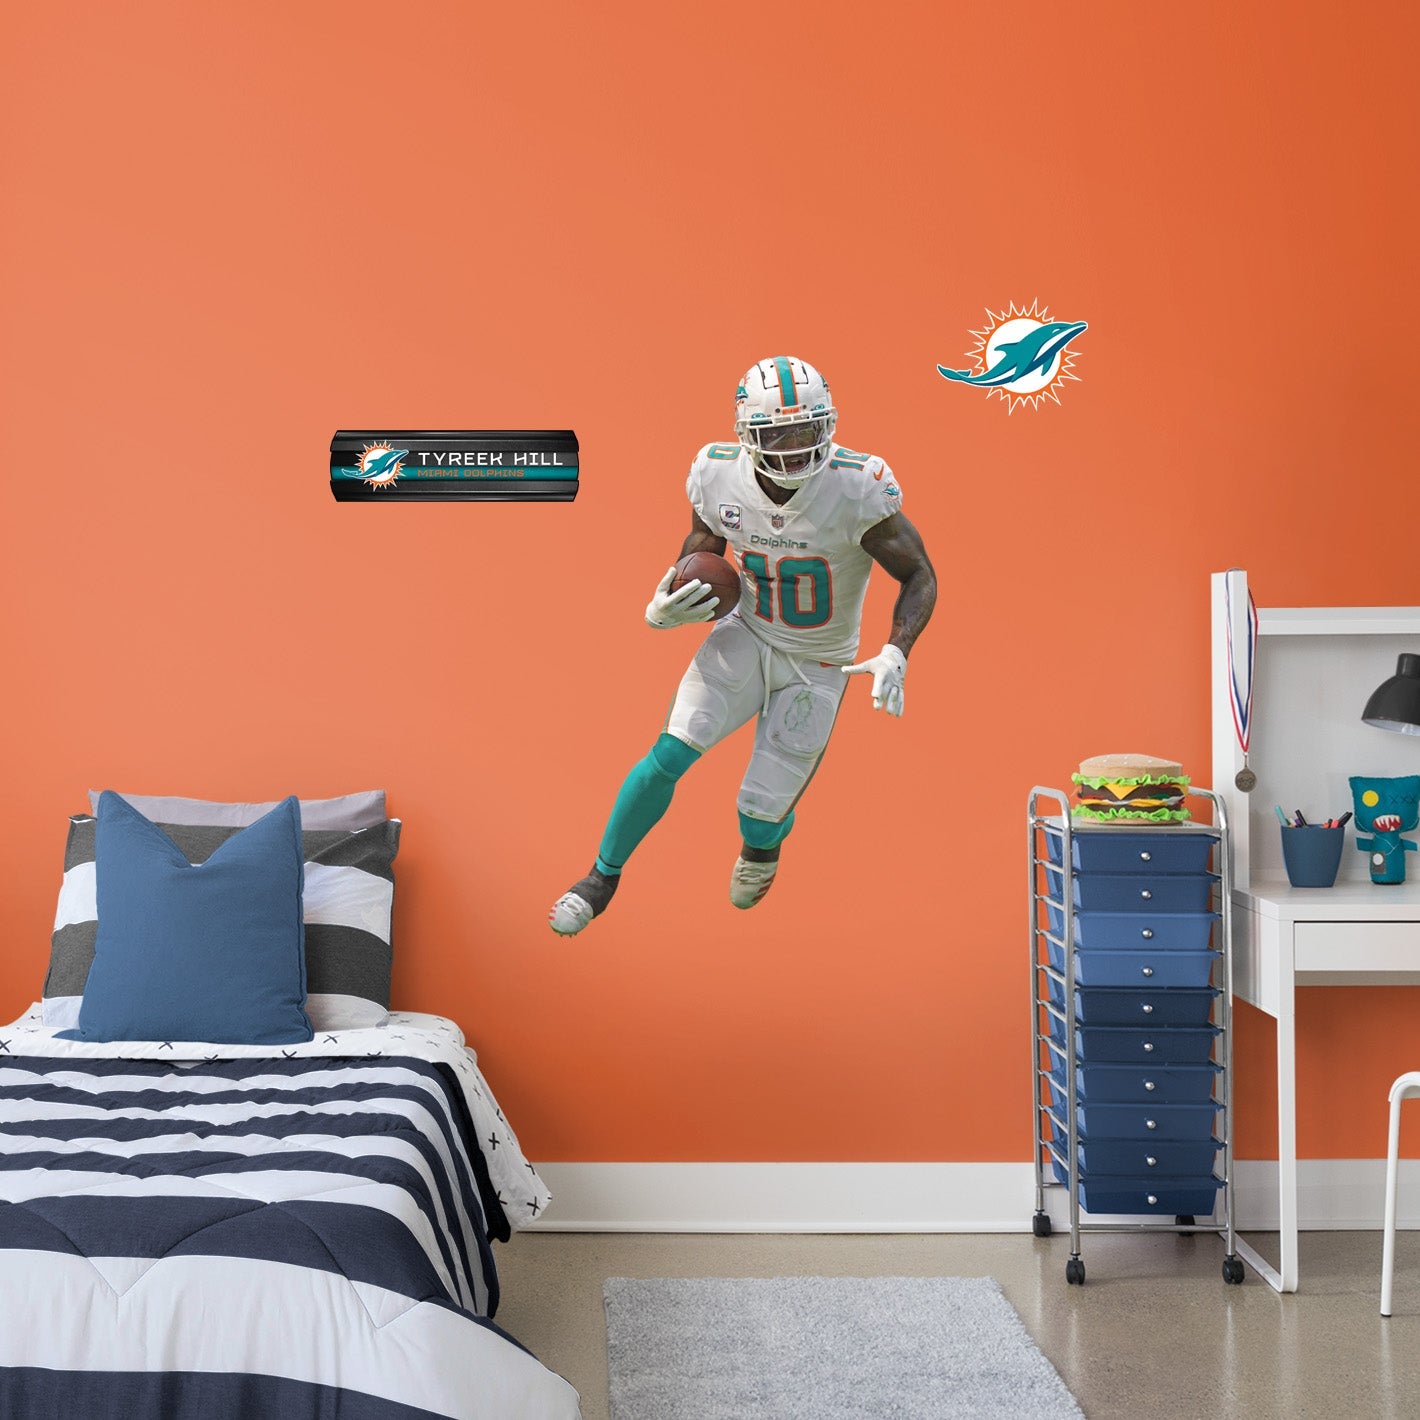 Miami Dolphins: Tyreek Hill White Jersey - Officially Licensed NFL Removable Adhesive Decal